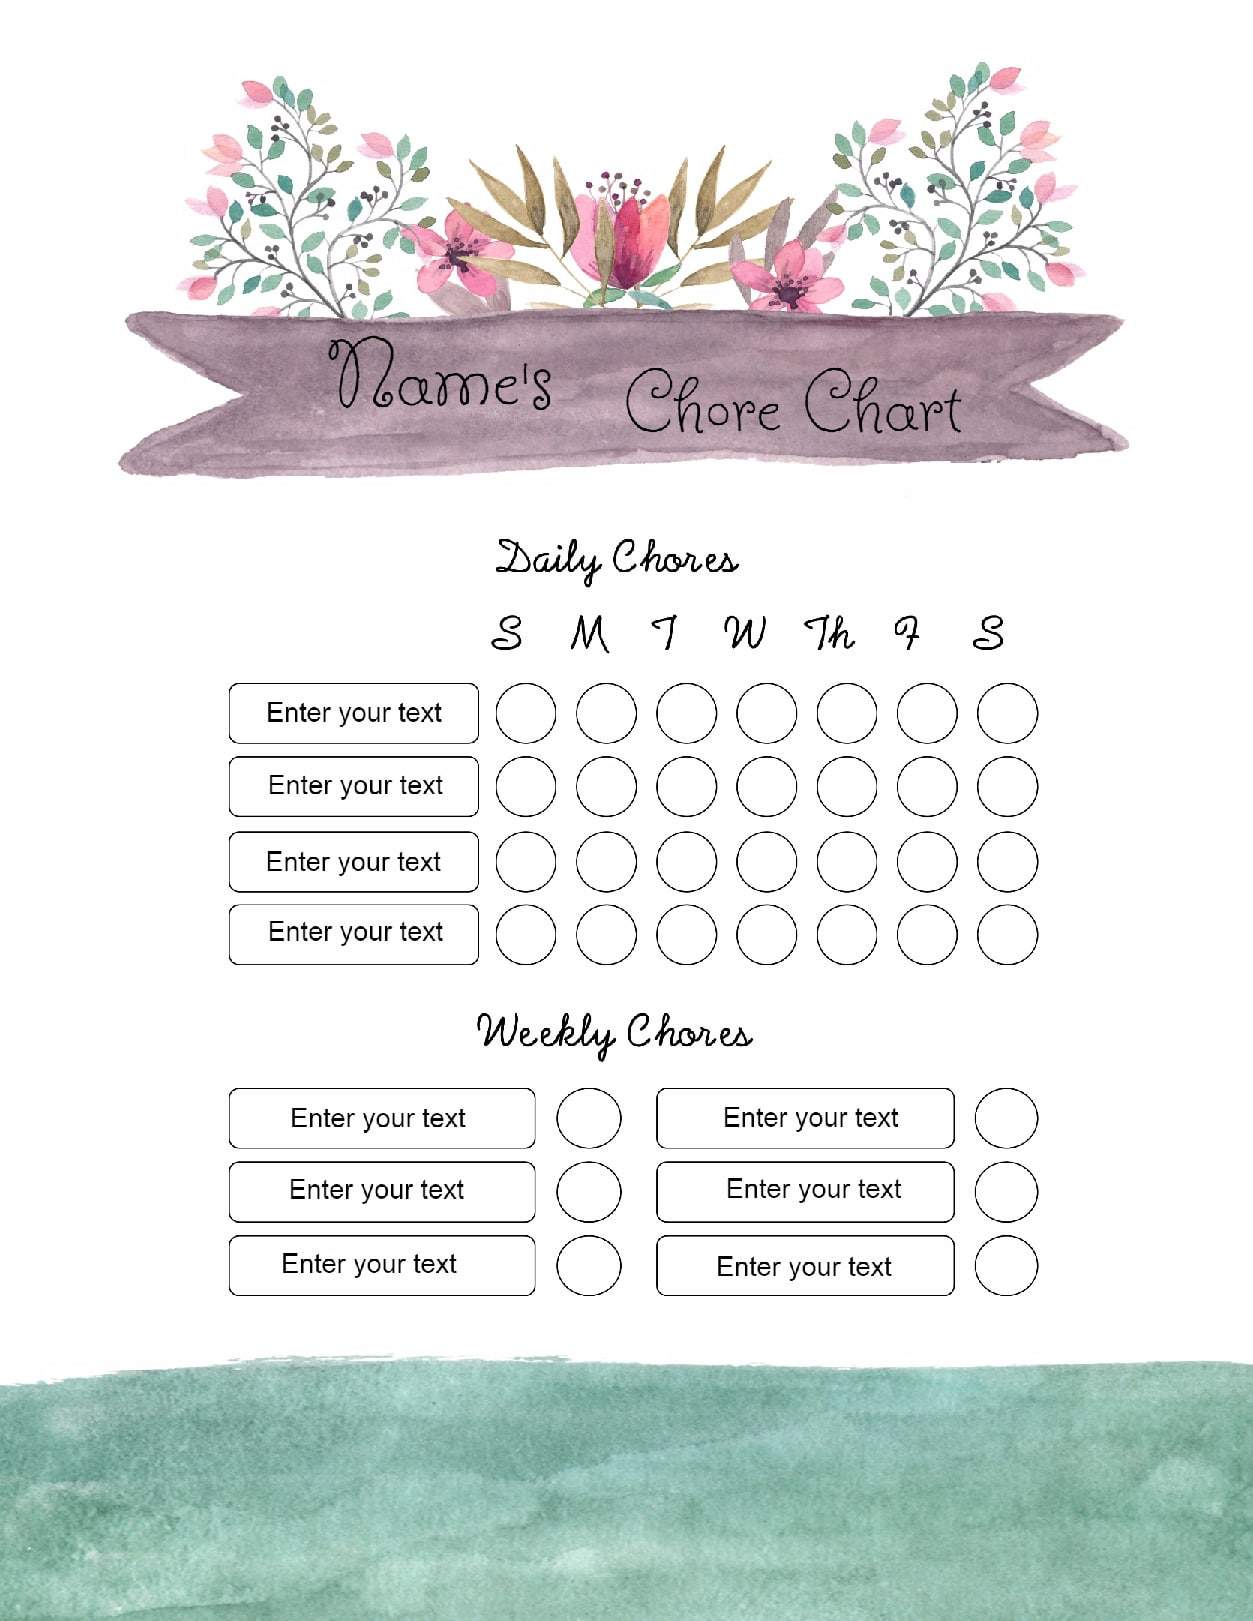 free-chore-chart-template-101-different-designs